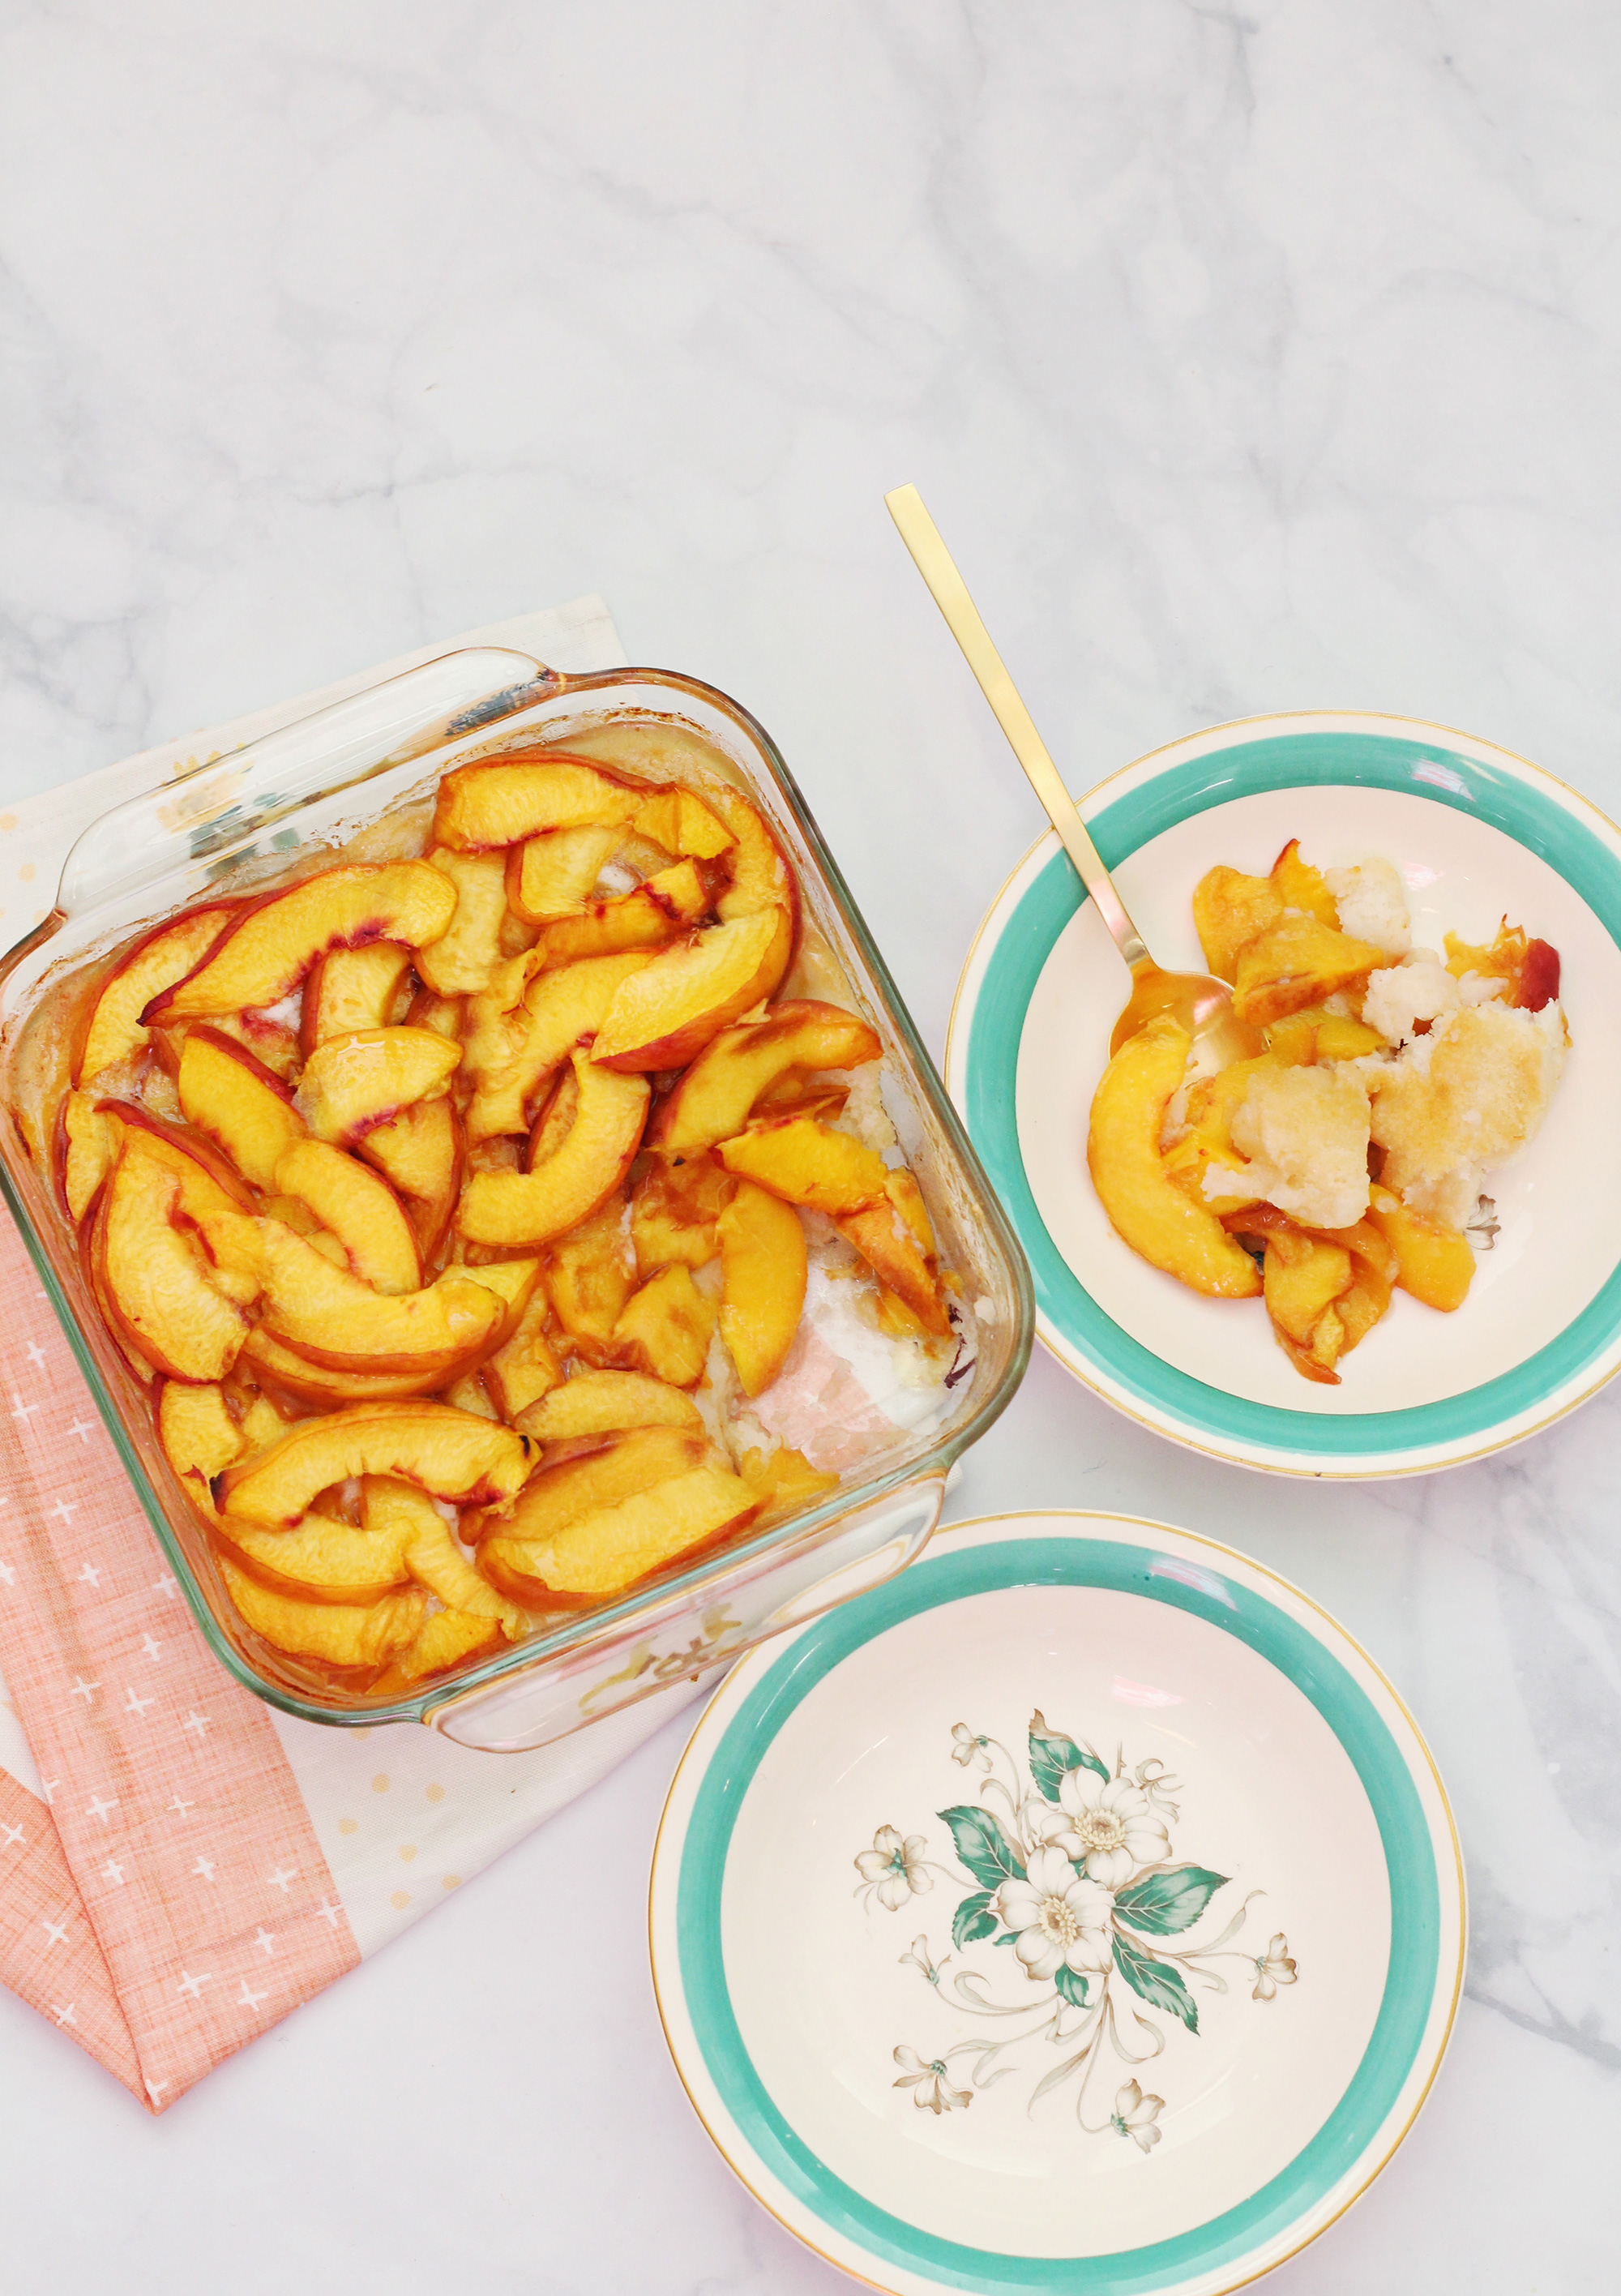 Serve up a fresh peach cobbler recipe. We brought our Lily & Val Peach Cobbler print to life on Lily & Val Living!